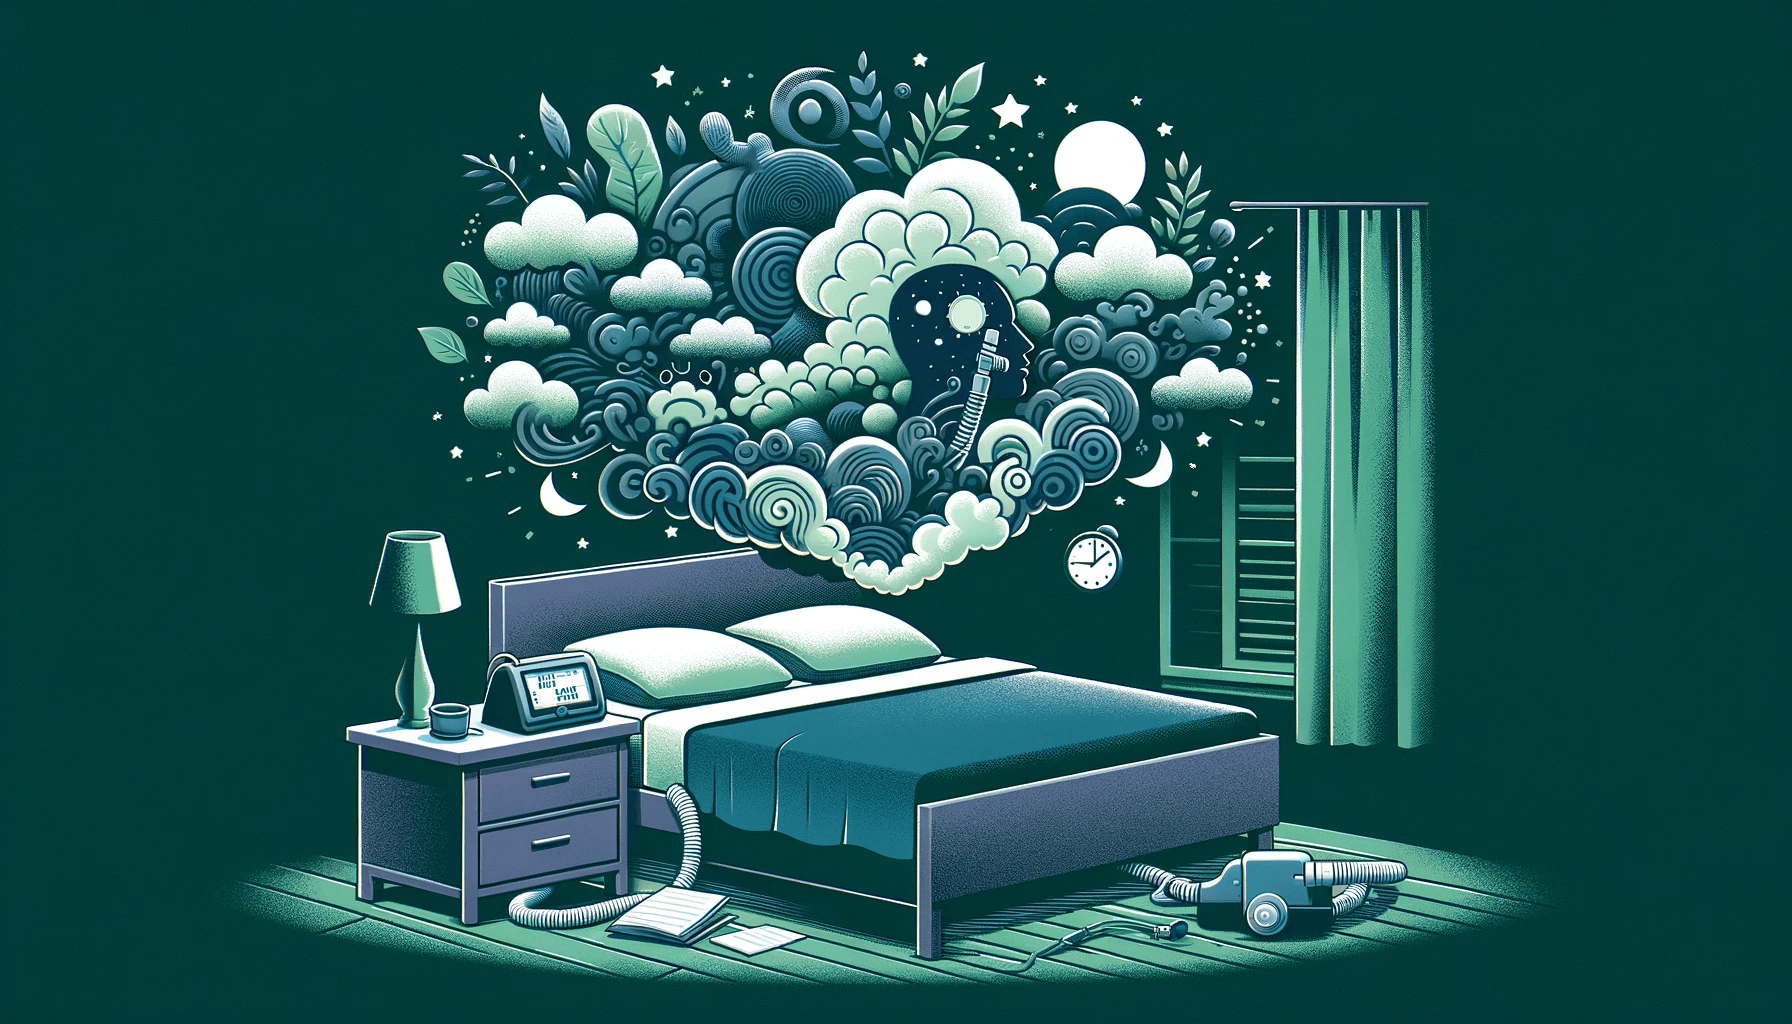 Create a 1200x630 px social share image with a dark green background. The illustration should depict a serene bedroom scene with a CPAP machine on a nightstand, symbolizing good sleep. Include a representation of a chaotic whirl of thoughts or "loud mind," perhaps as a stormy cloud above the bed, calming down with the presence of the CPAP machine. Add elements that suggest productivity, like a neat to-do list or a clock showing an early morning hour, to convey a transformation from chaos to order.